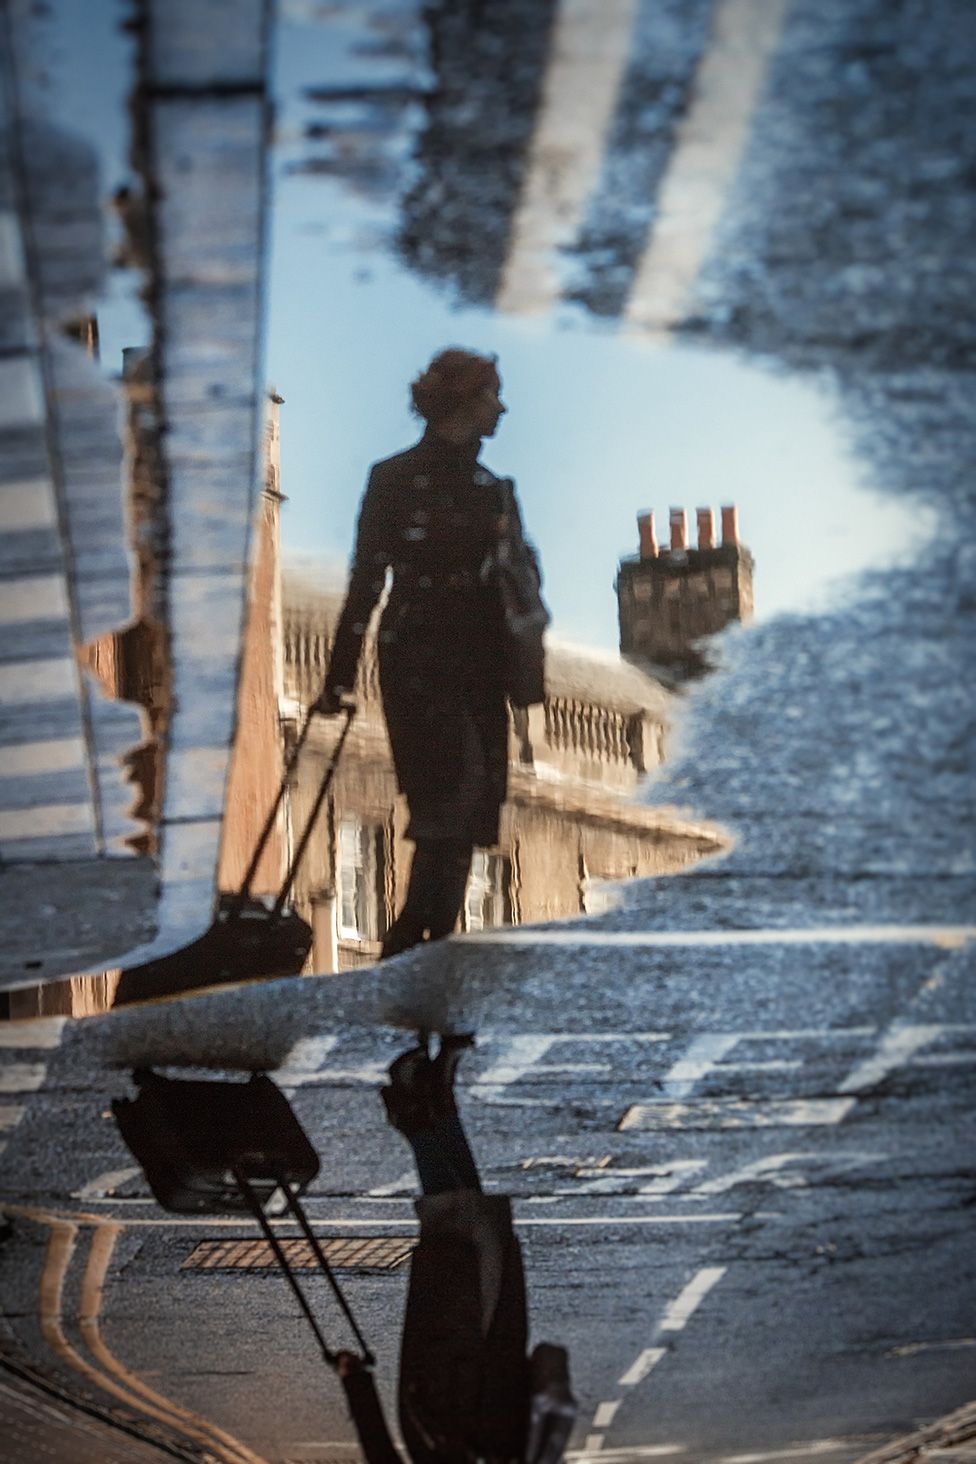 Reflection of a lady in a puddle